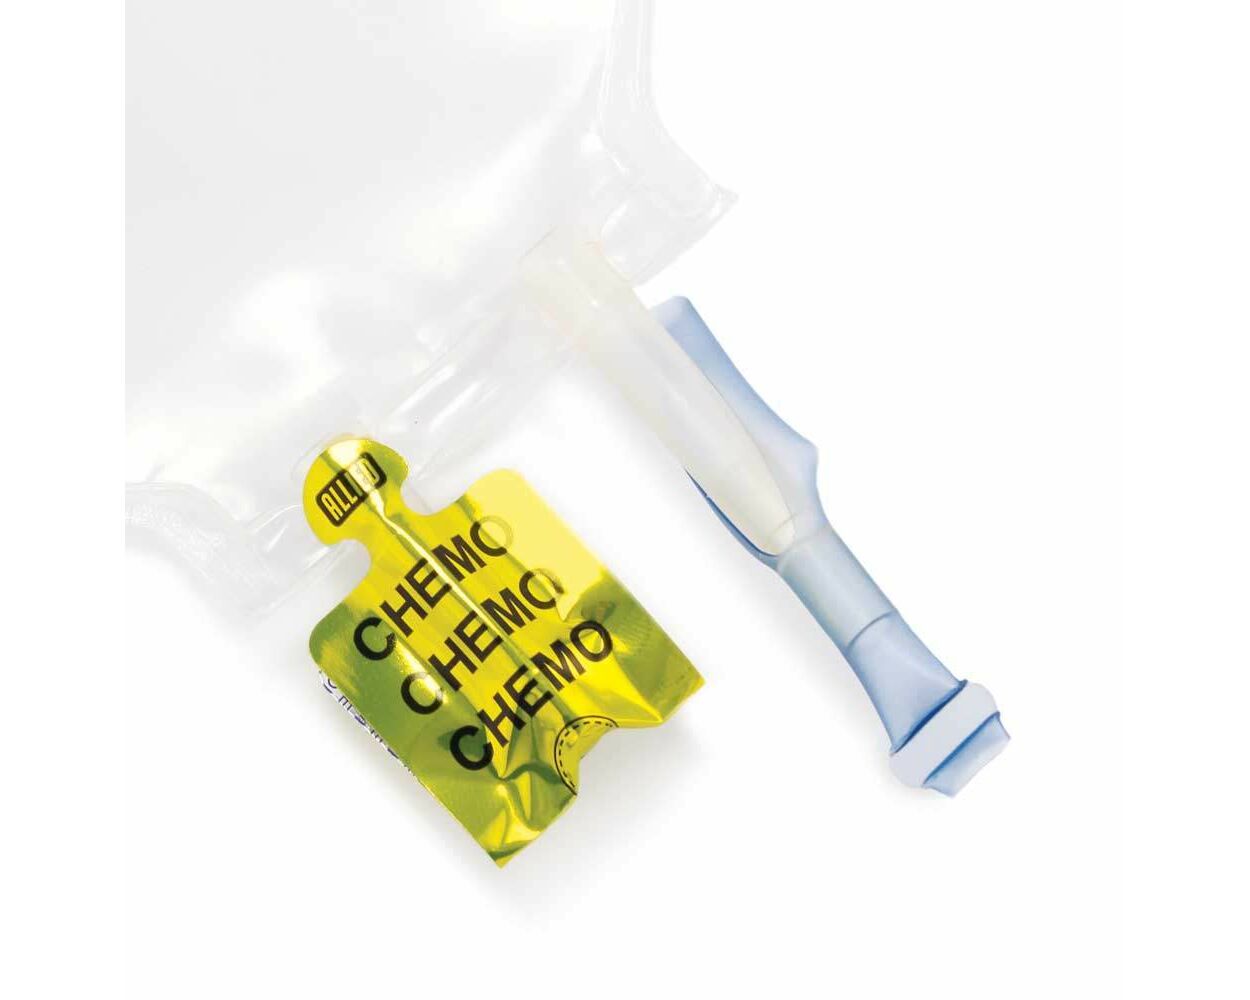 IV Bag Labels Products, Supplies and Equipment